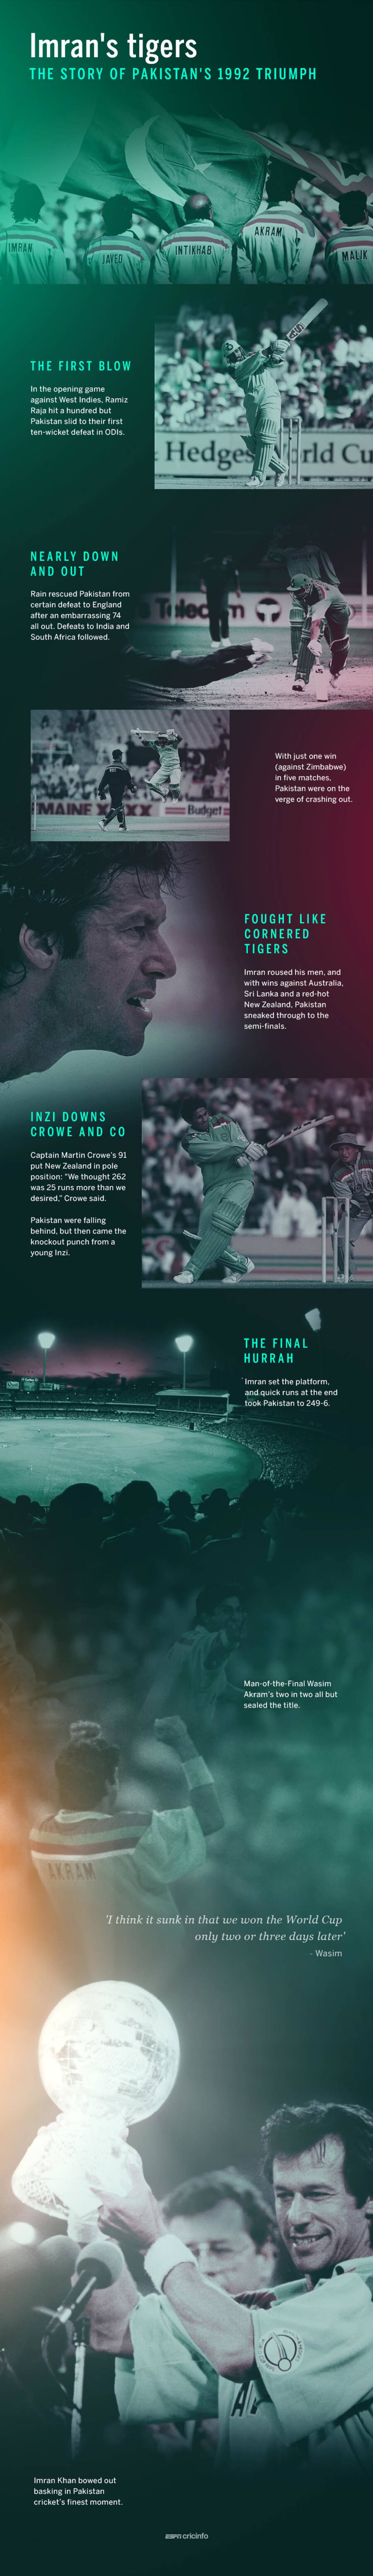 The story of Pakistan's 1992 World Cup triumph 